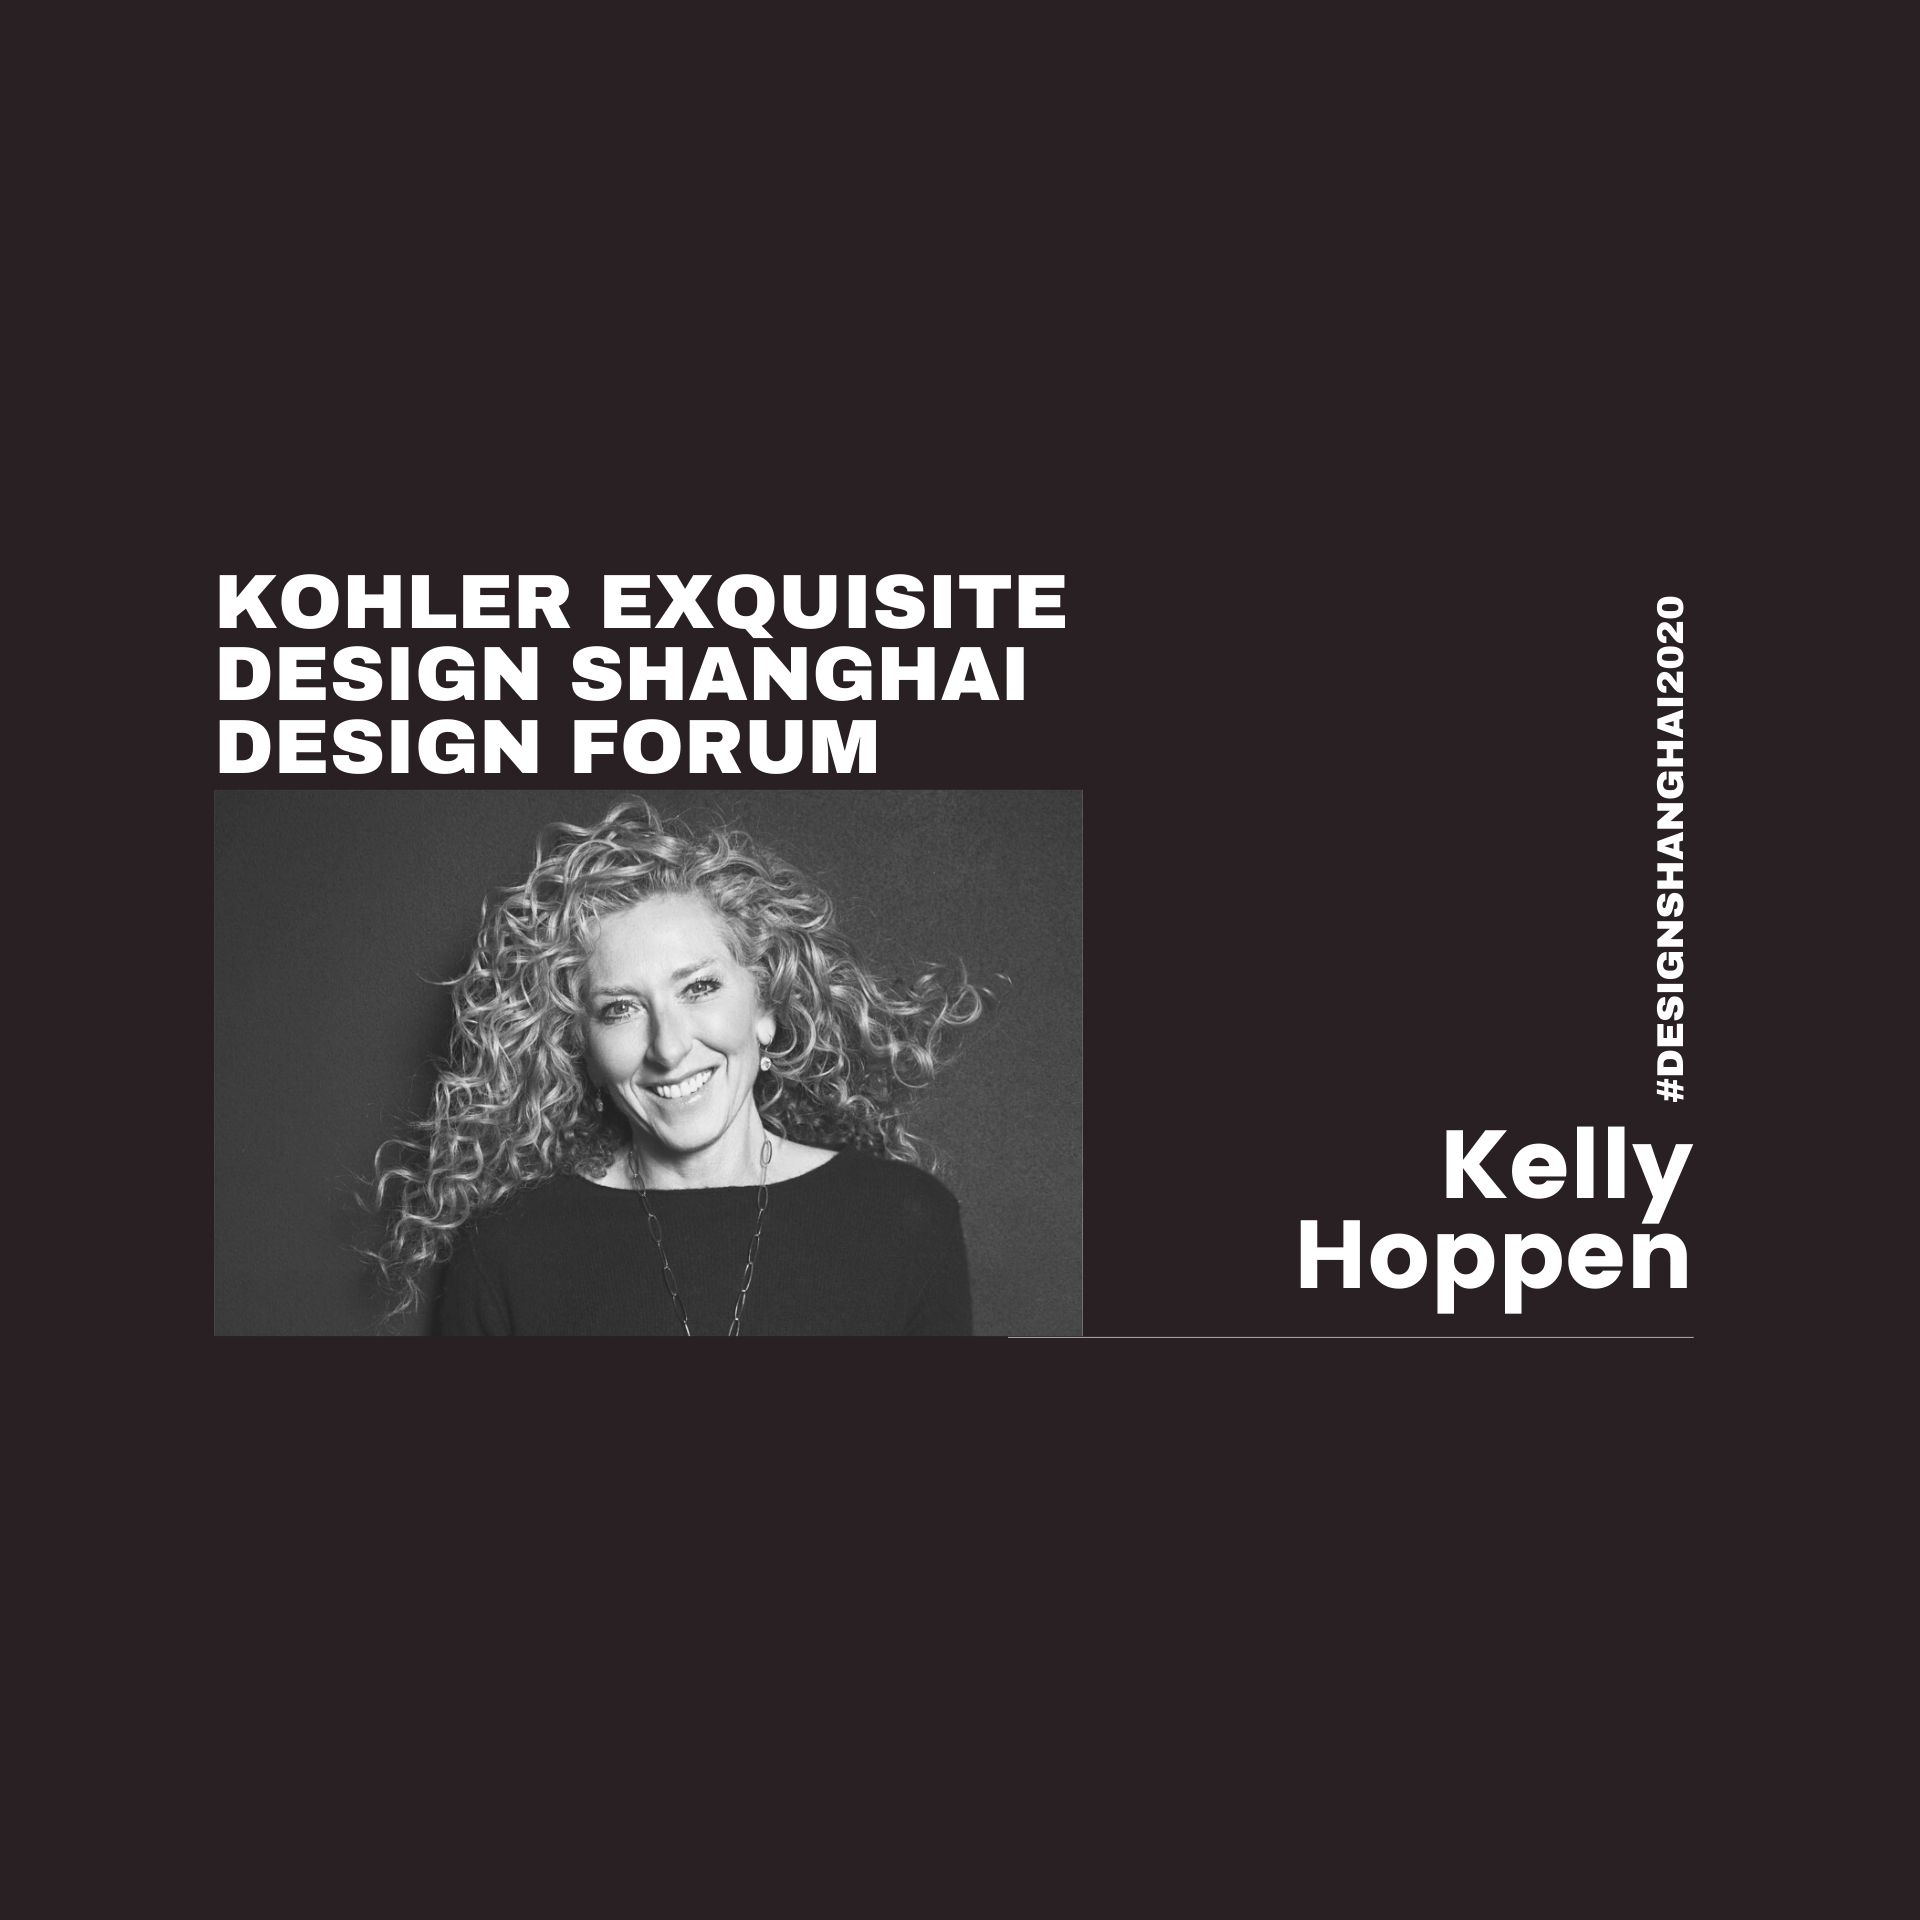 KELLY HOPPEN: DESIGNS FOR A POST-COVID WORLD